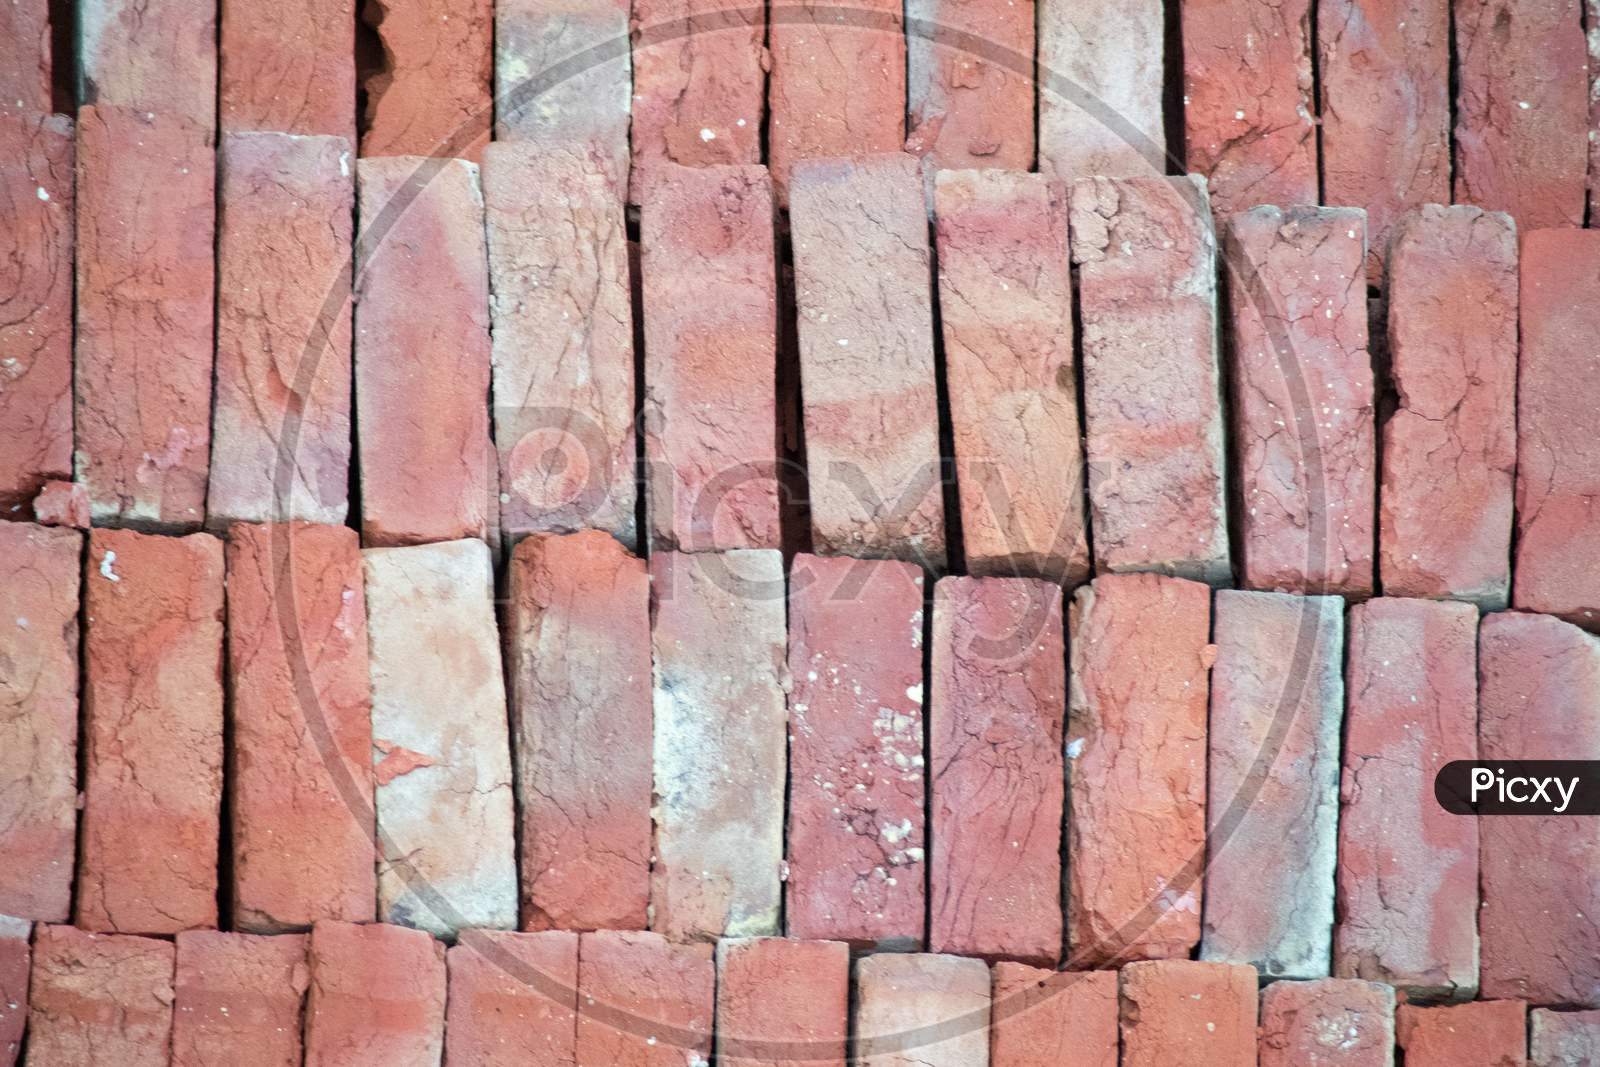 Pile Of Bricks Placed On The Ground, Showing The Pattern And The Distinctive Red Color